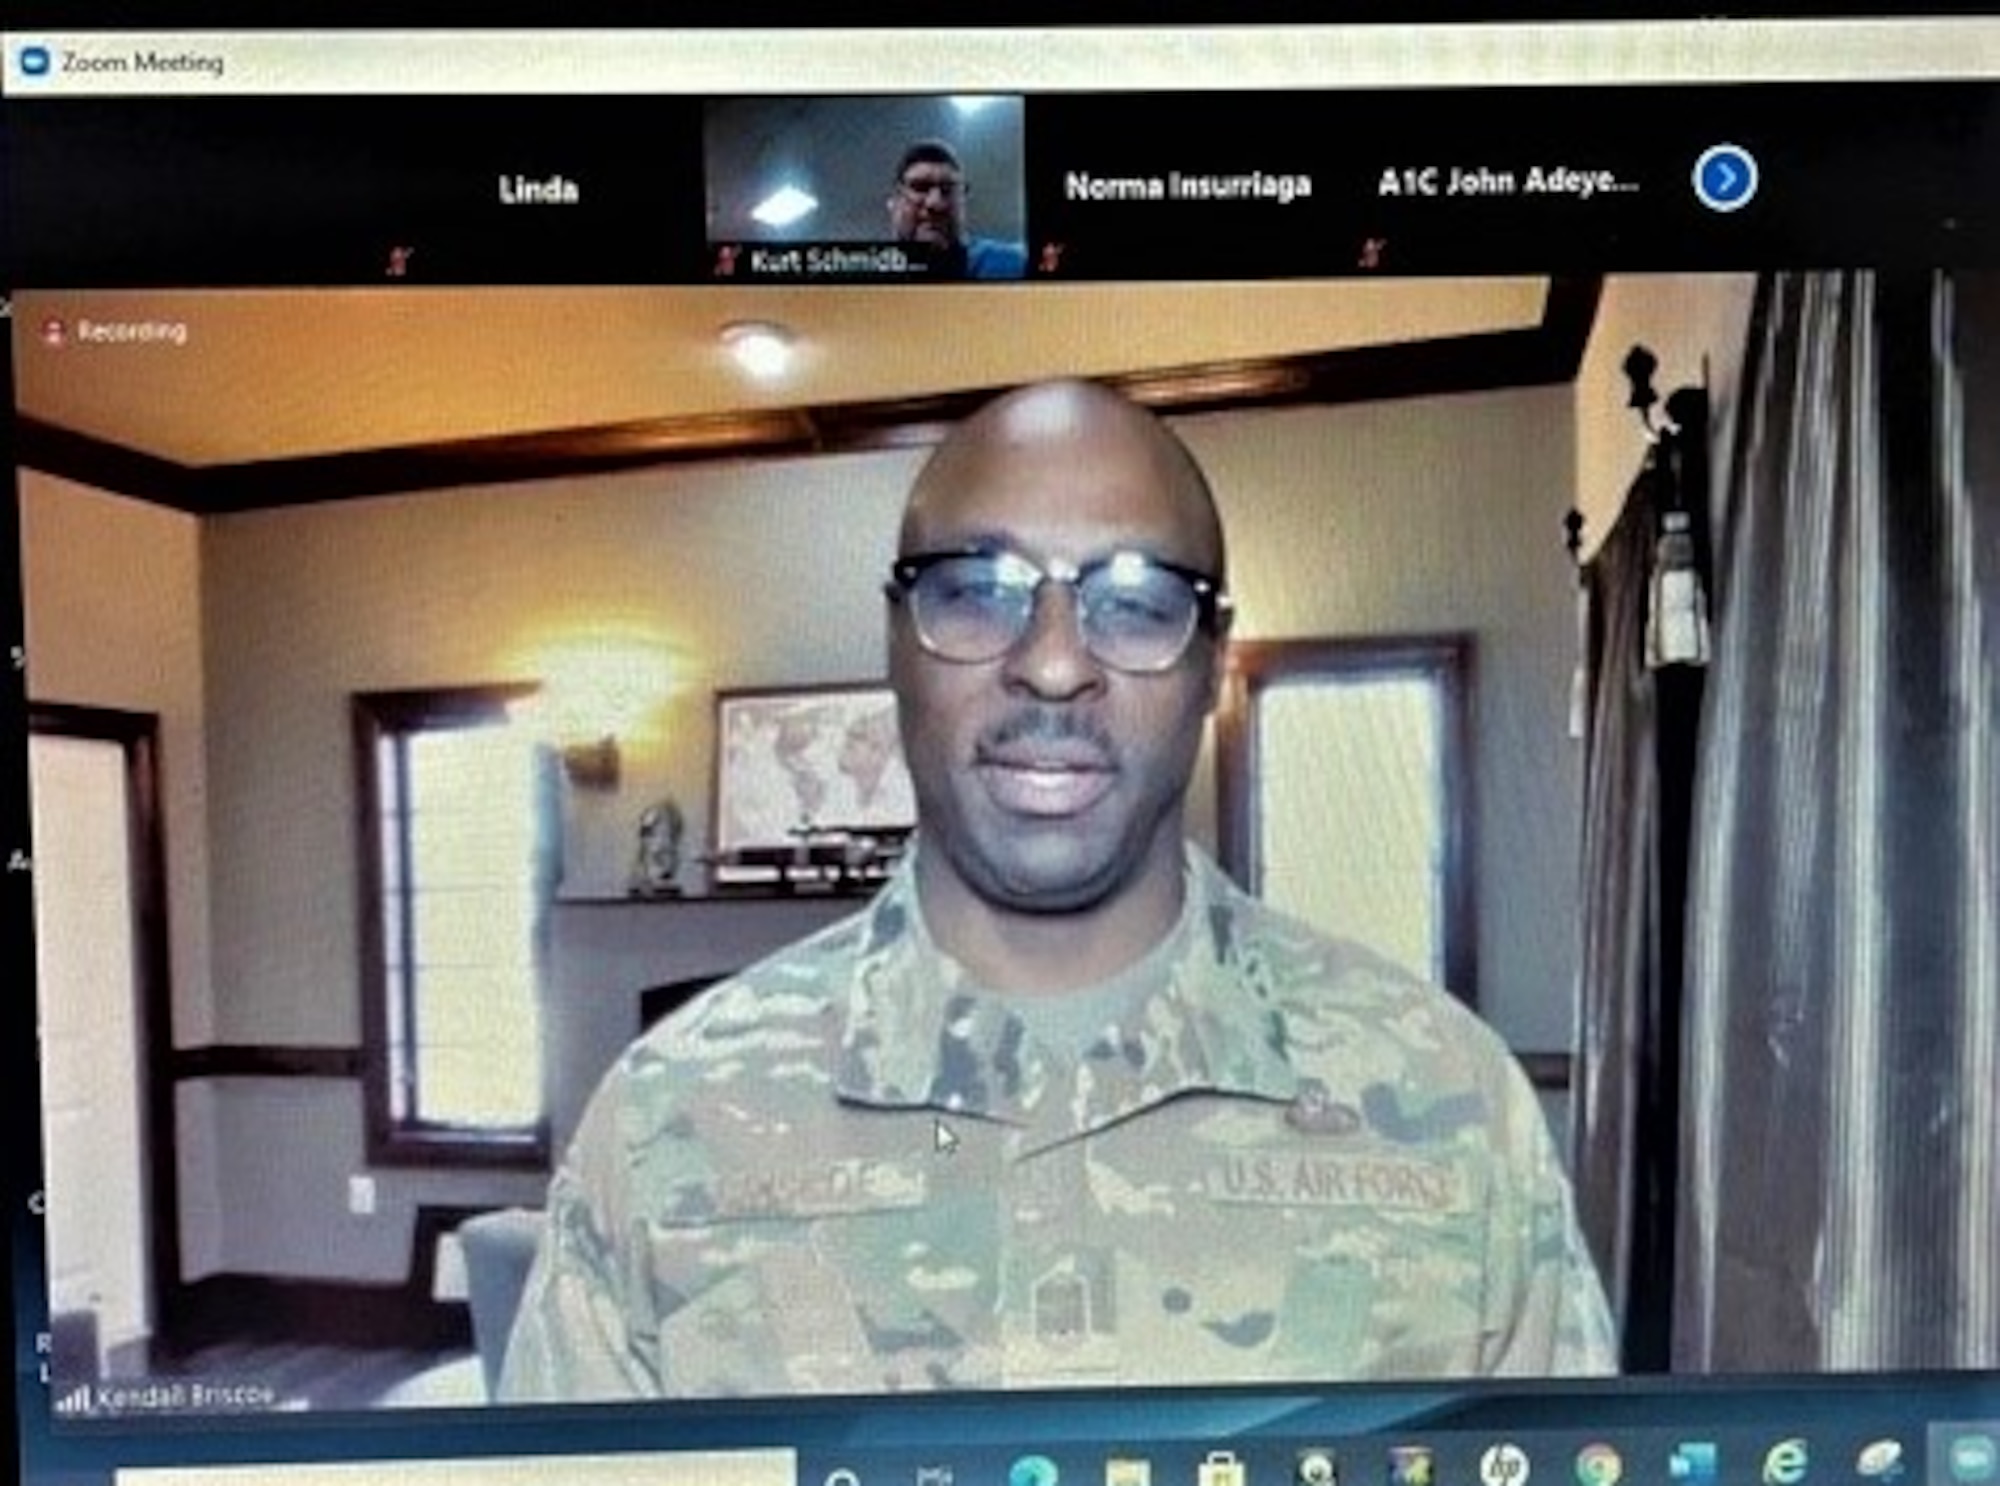 Chief Master Sgt. Kendall Briscoe, executive for enlisted matters and finance career field manager at the office of Air Force Financial Management and Comptroller